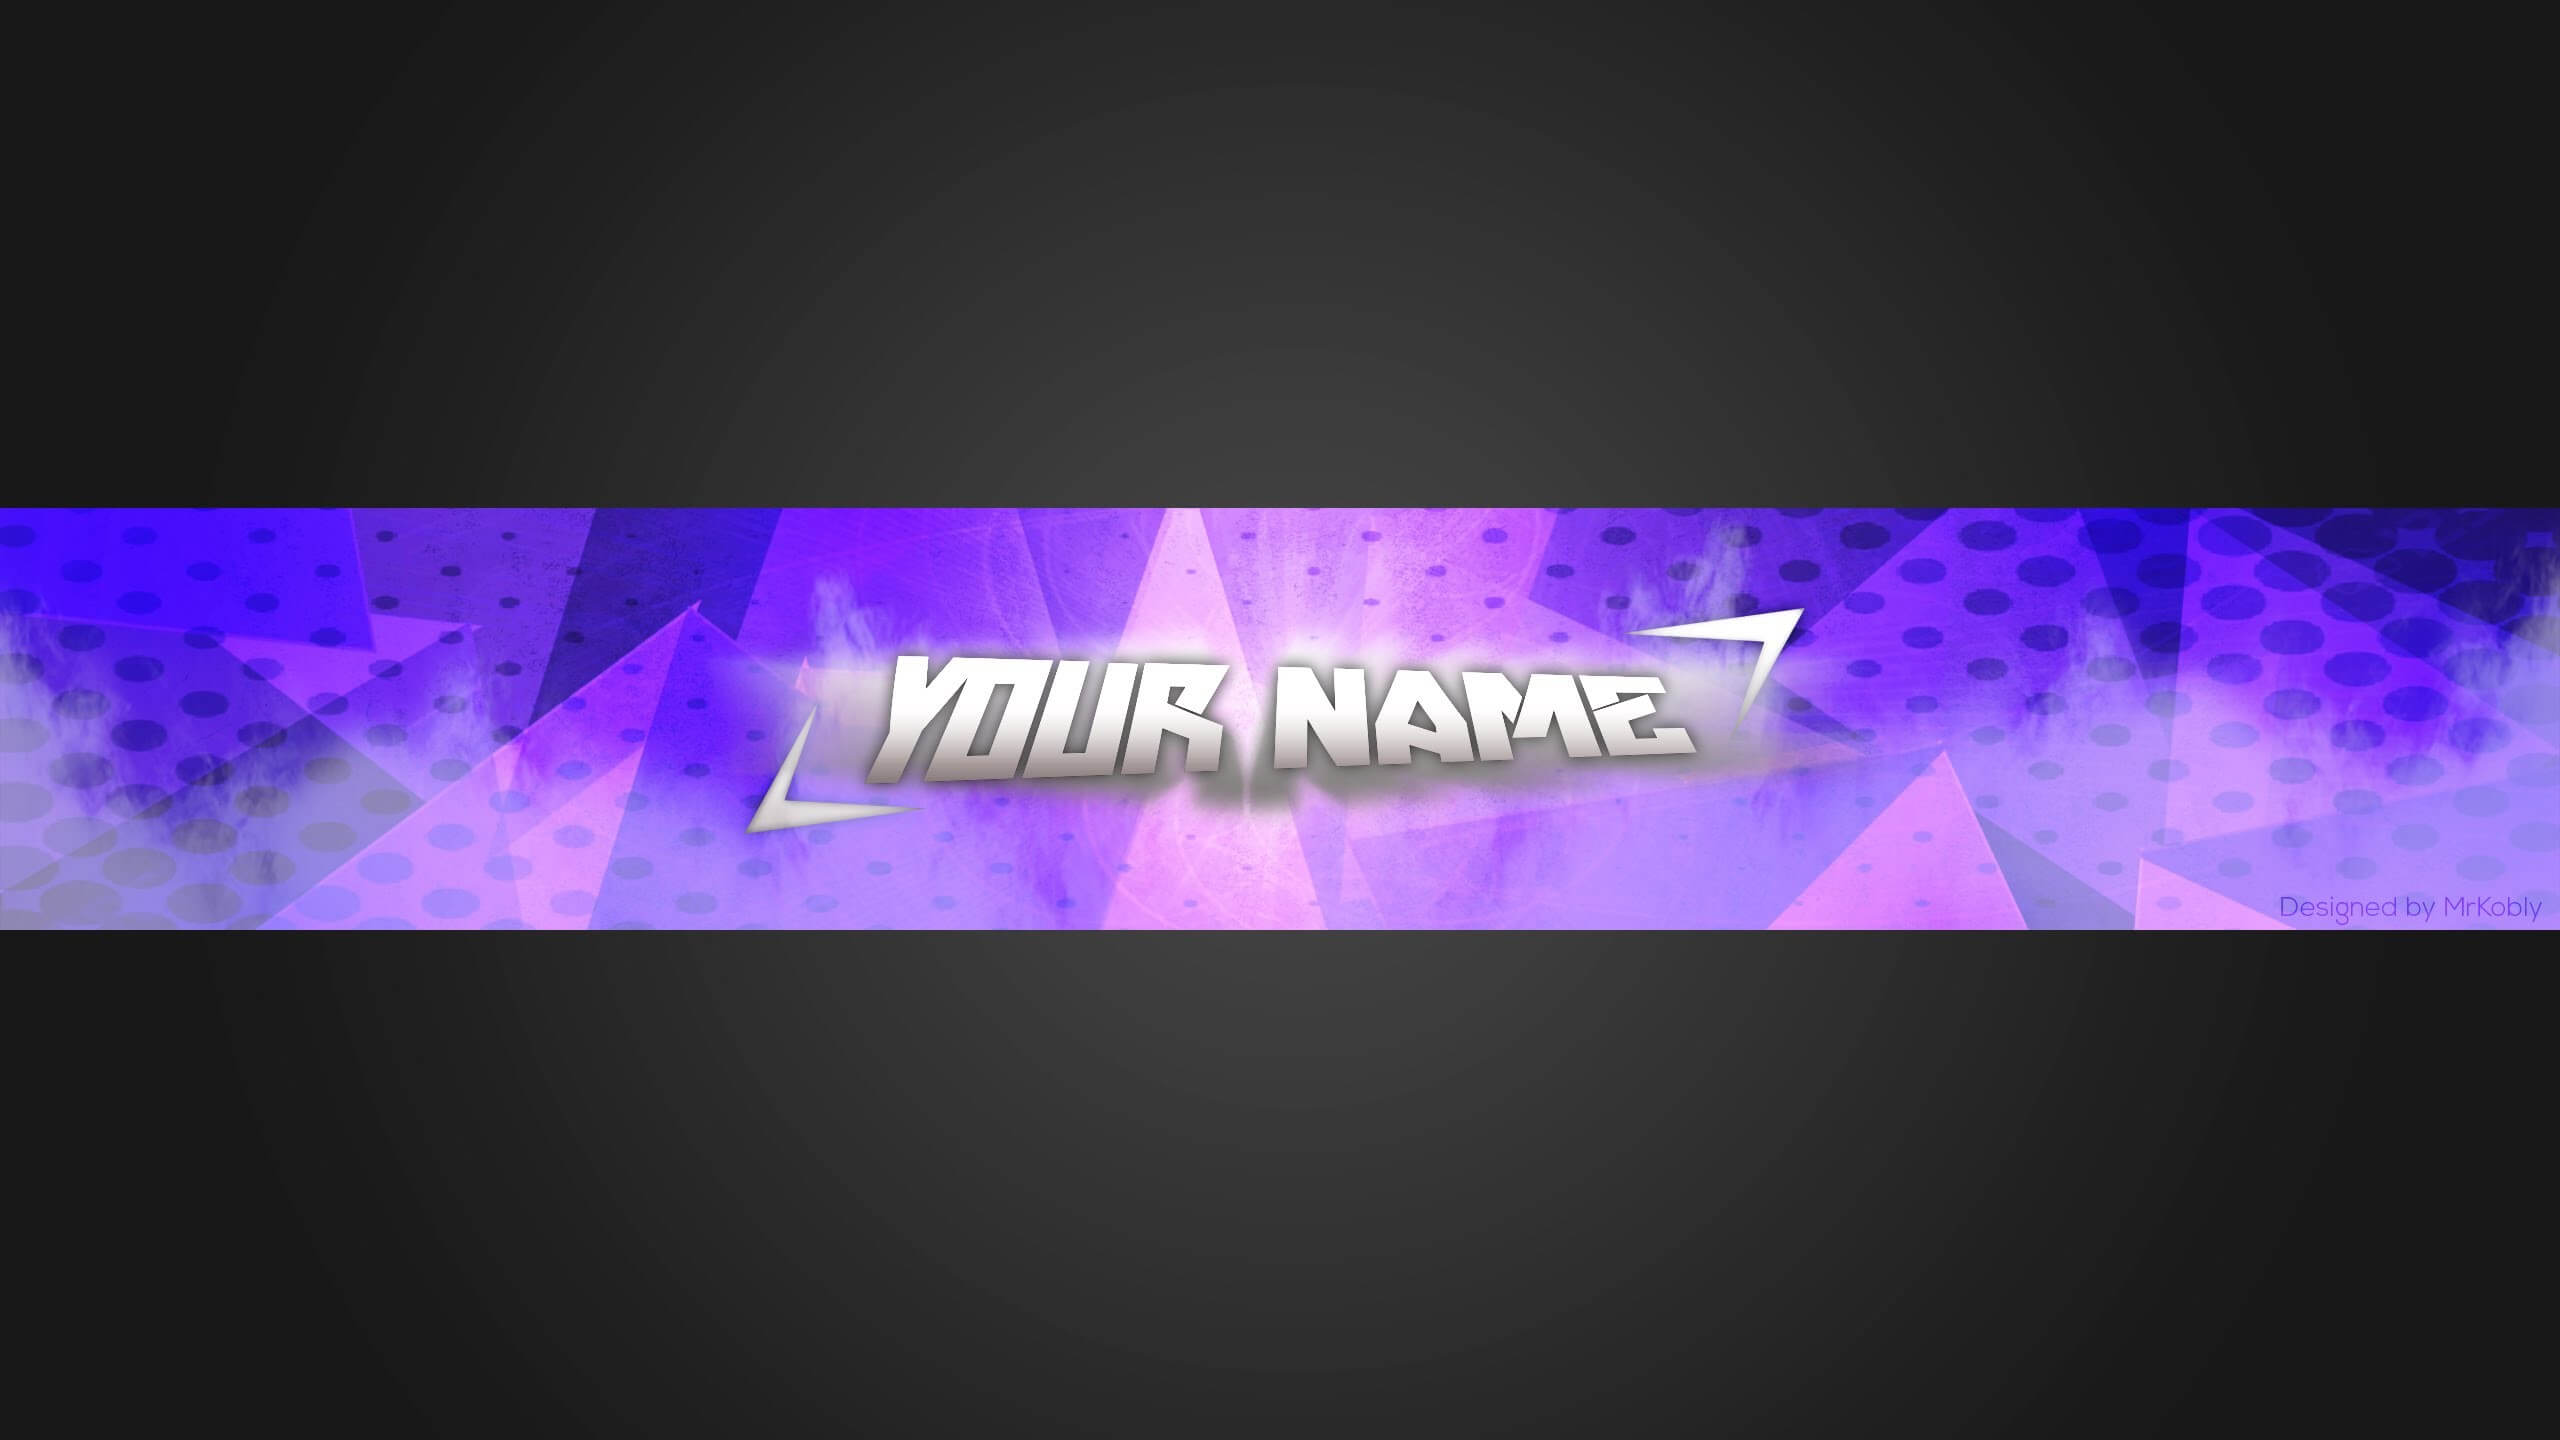 resize image for youtube banner